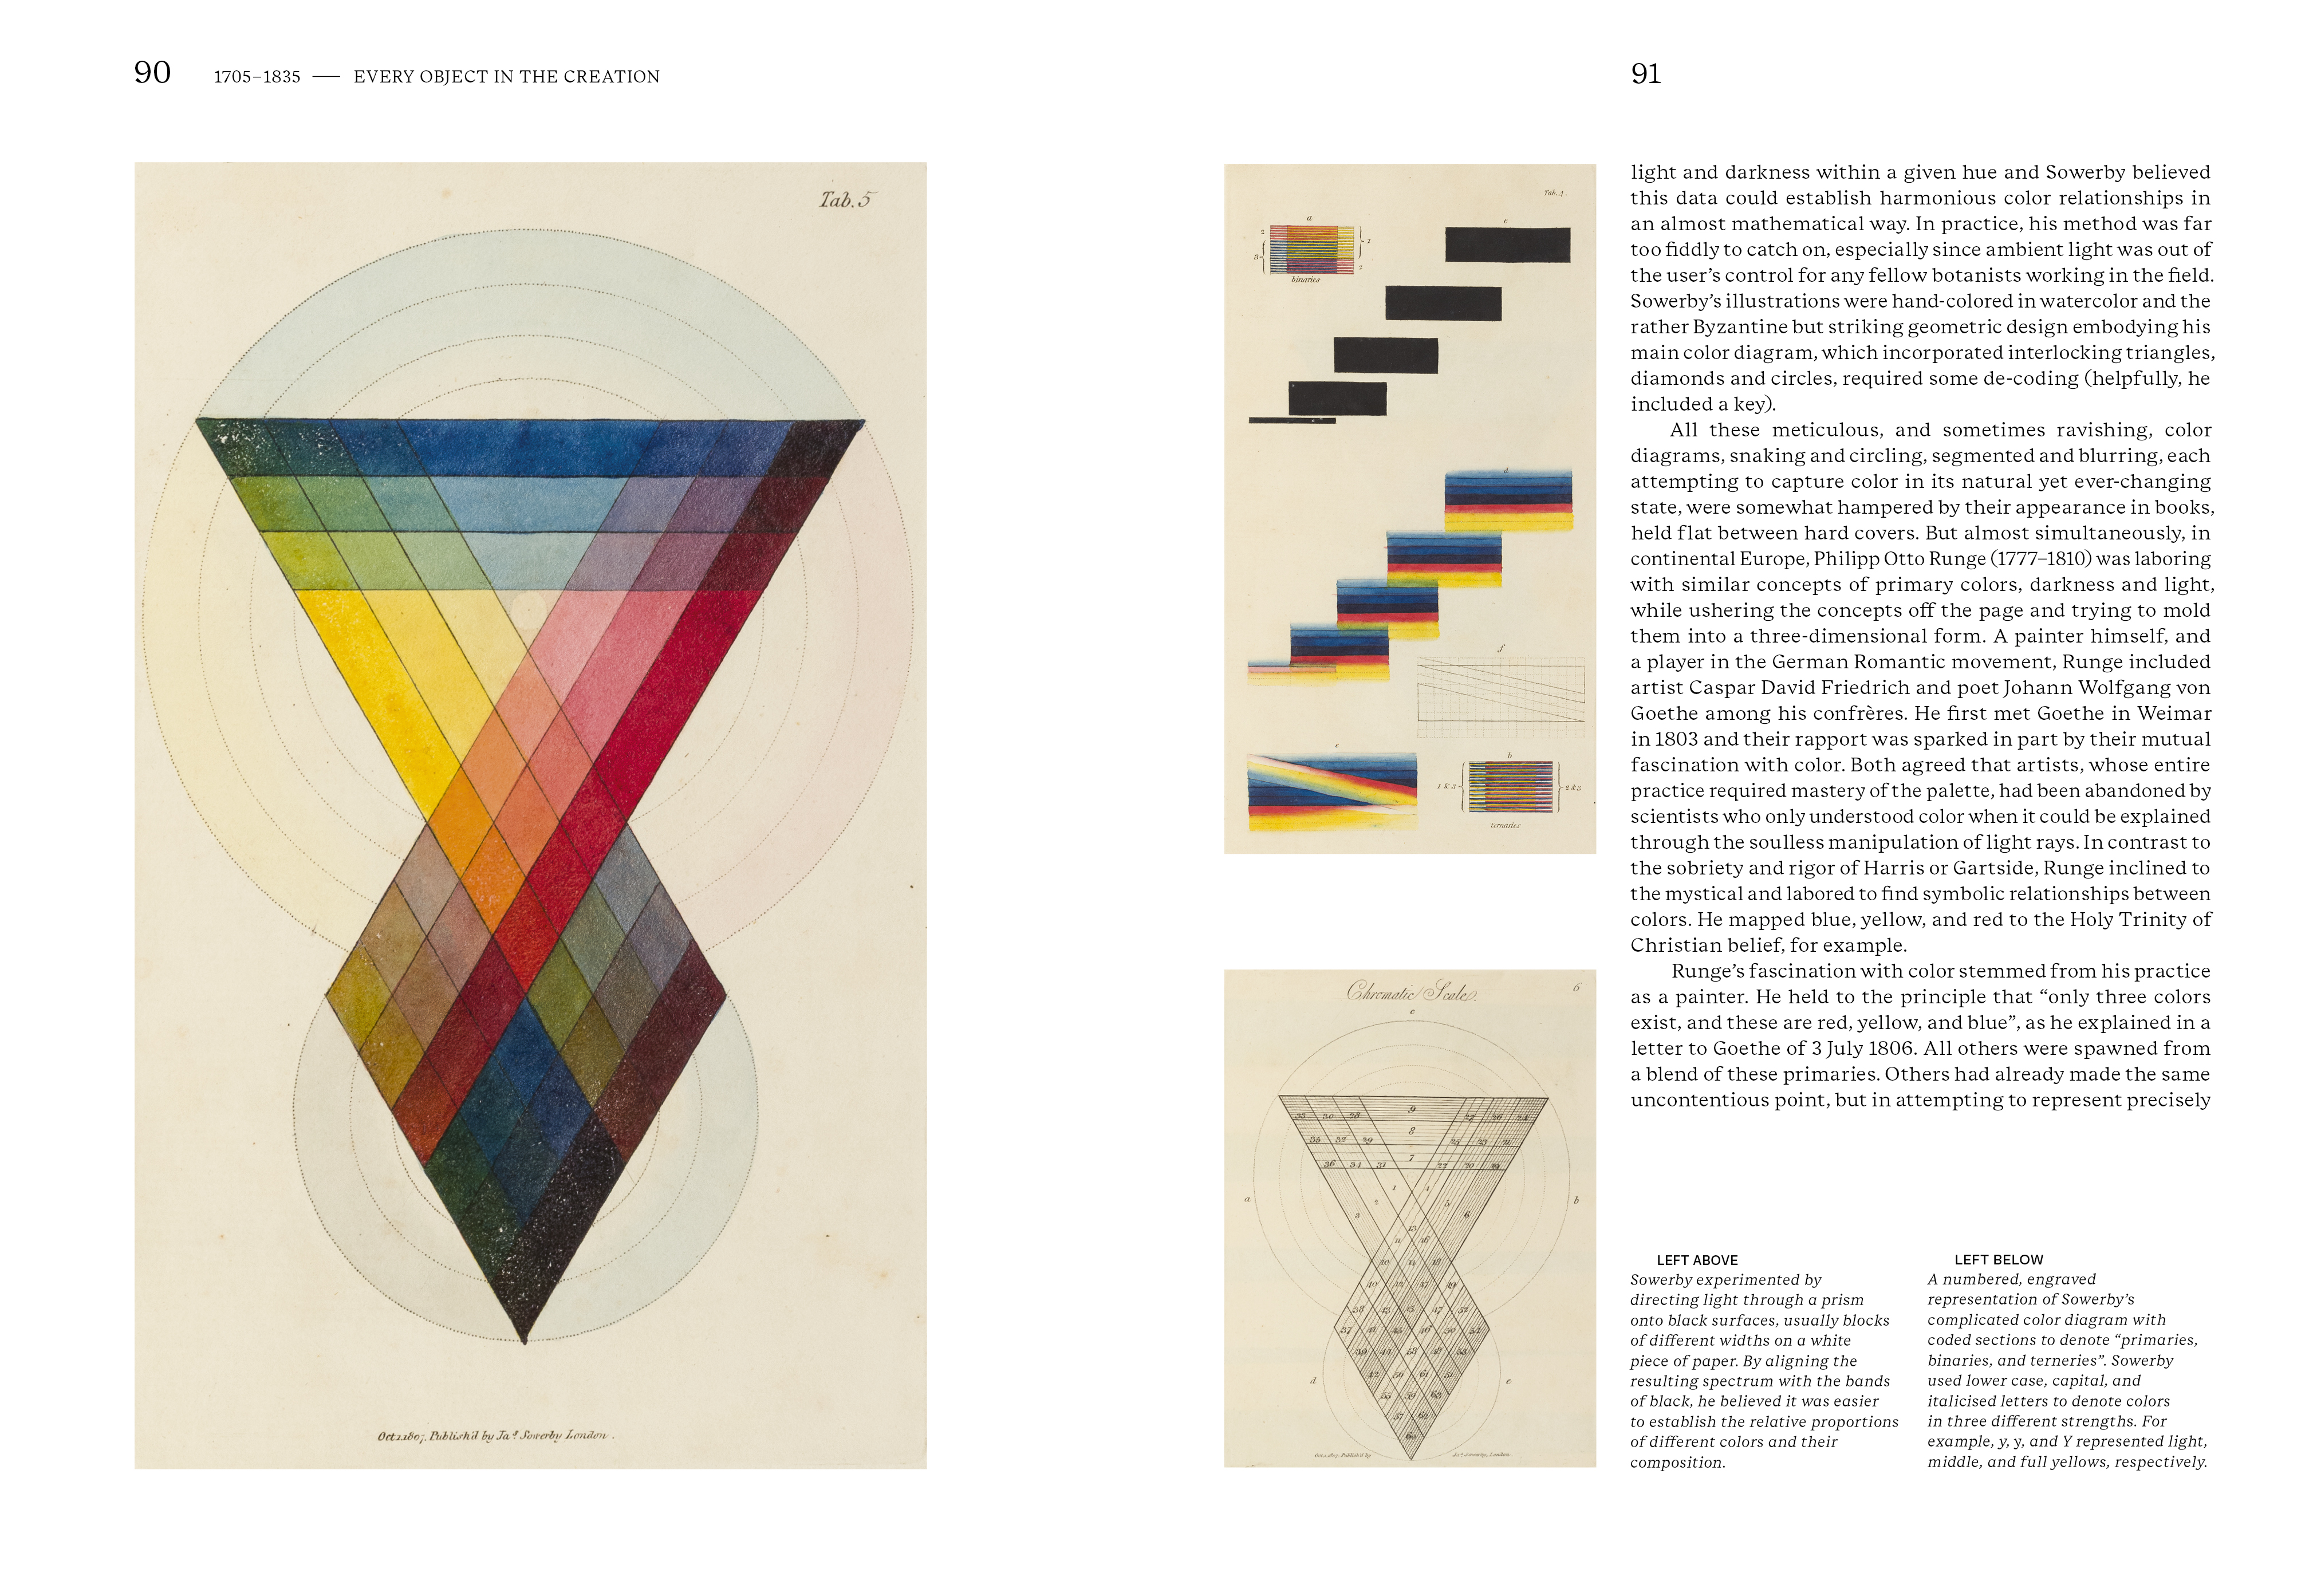 The History of Color